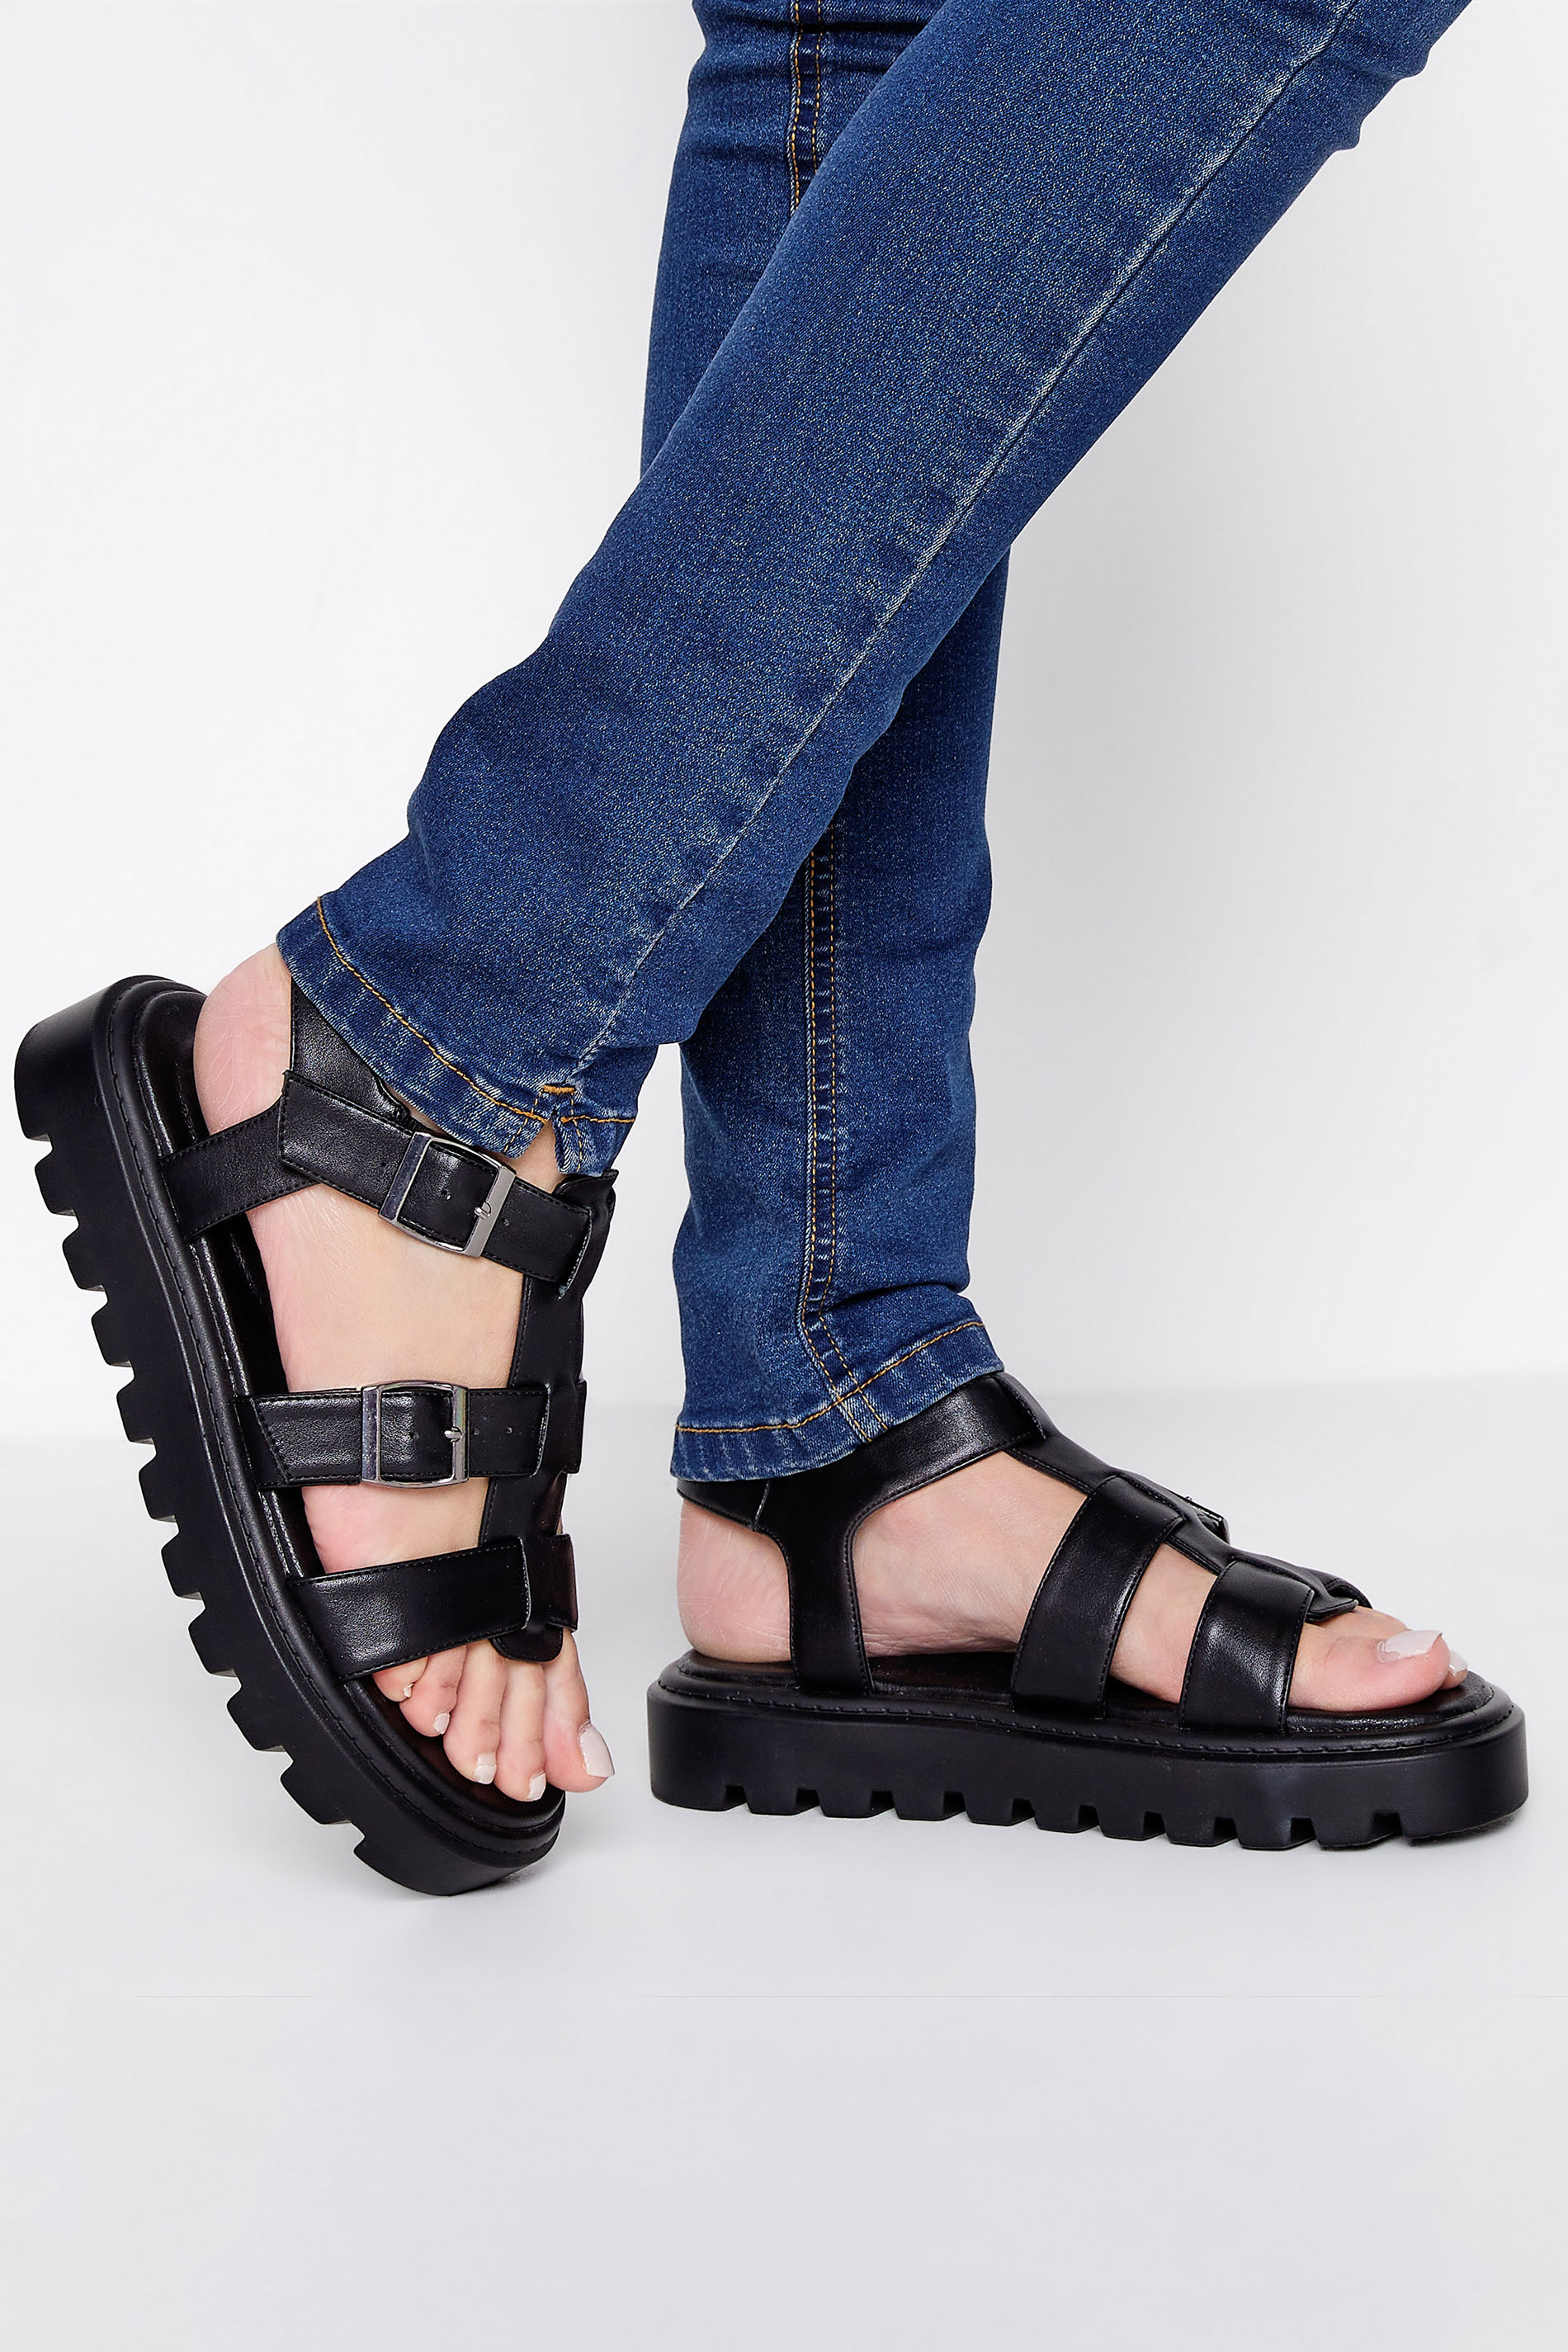 LTS Black Gladiator Sandals In Standard Fit | Long Tall Sally 1